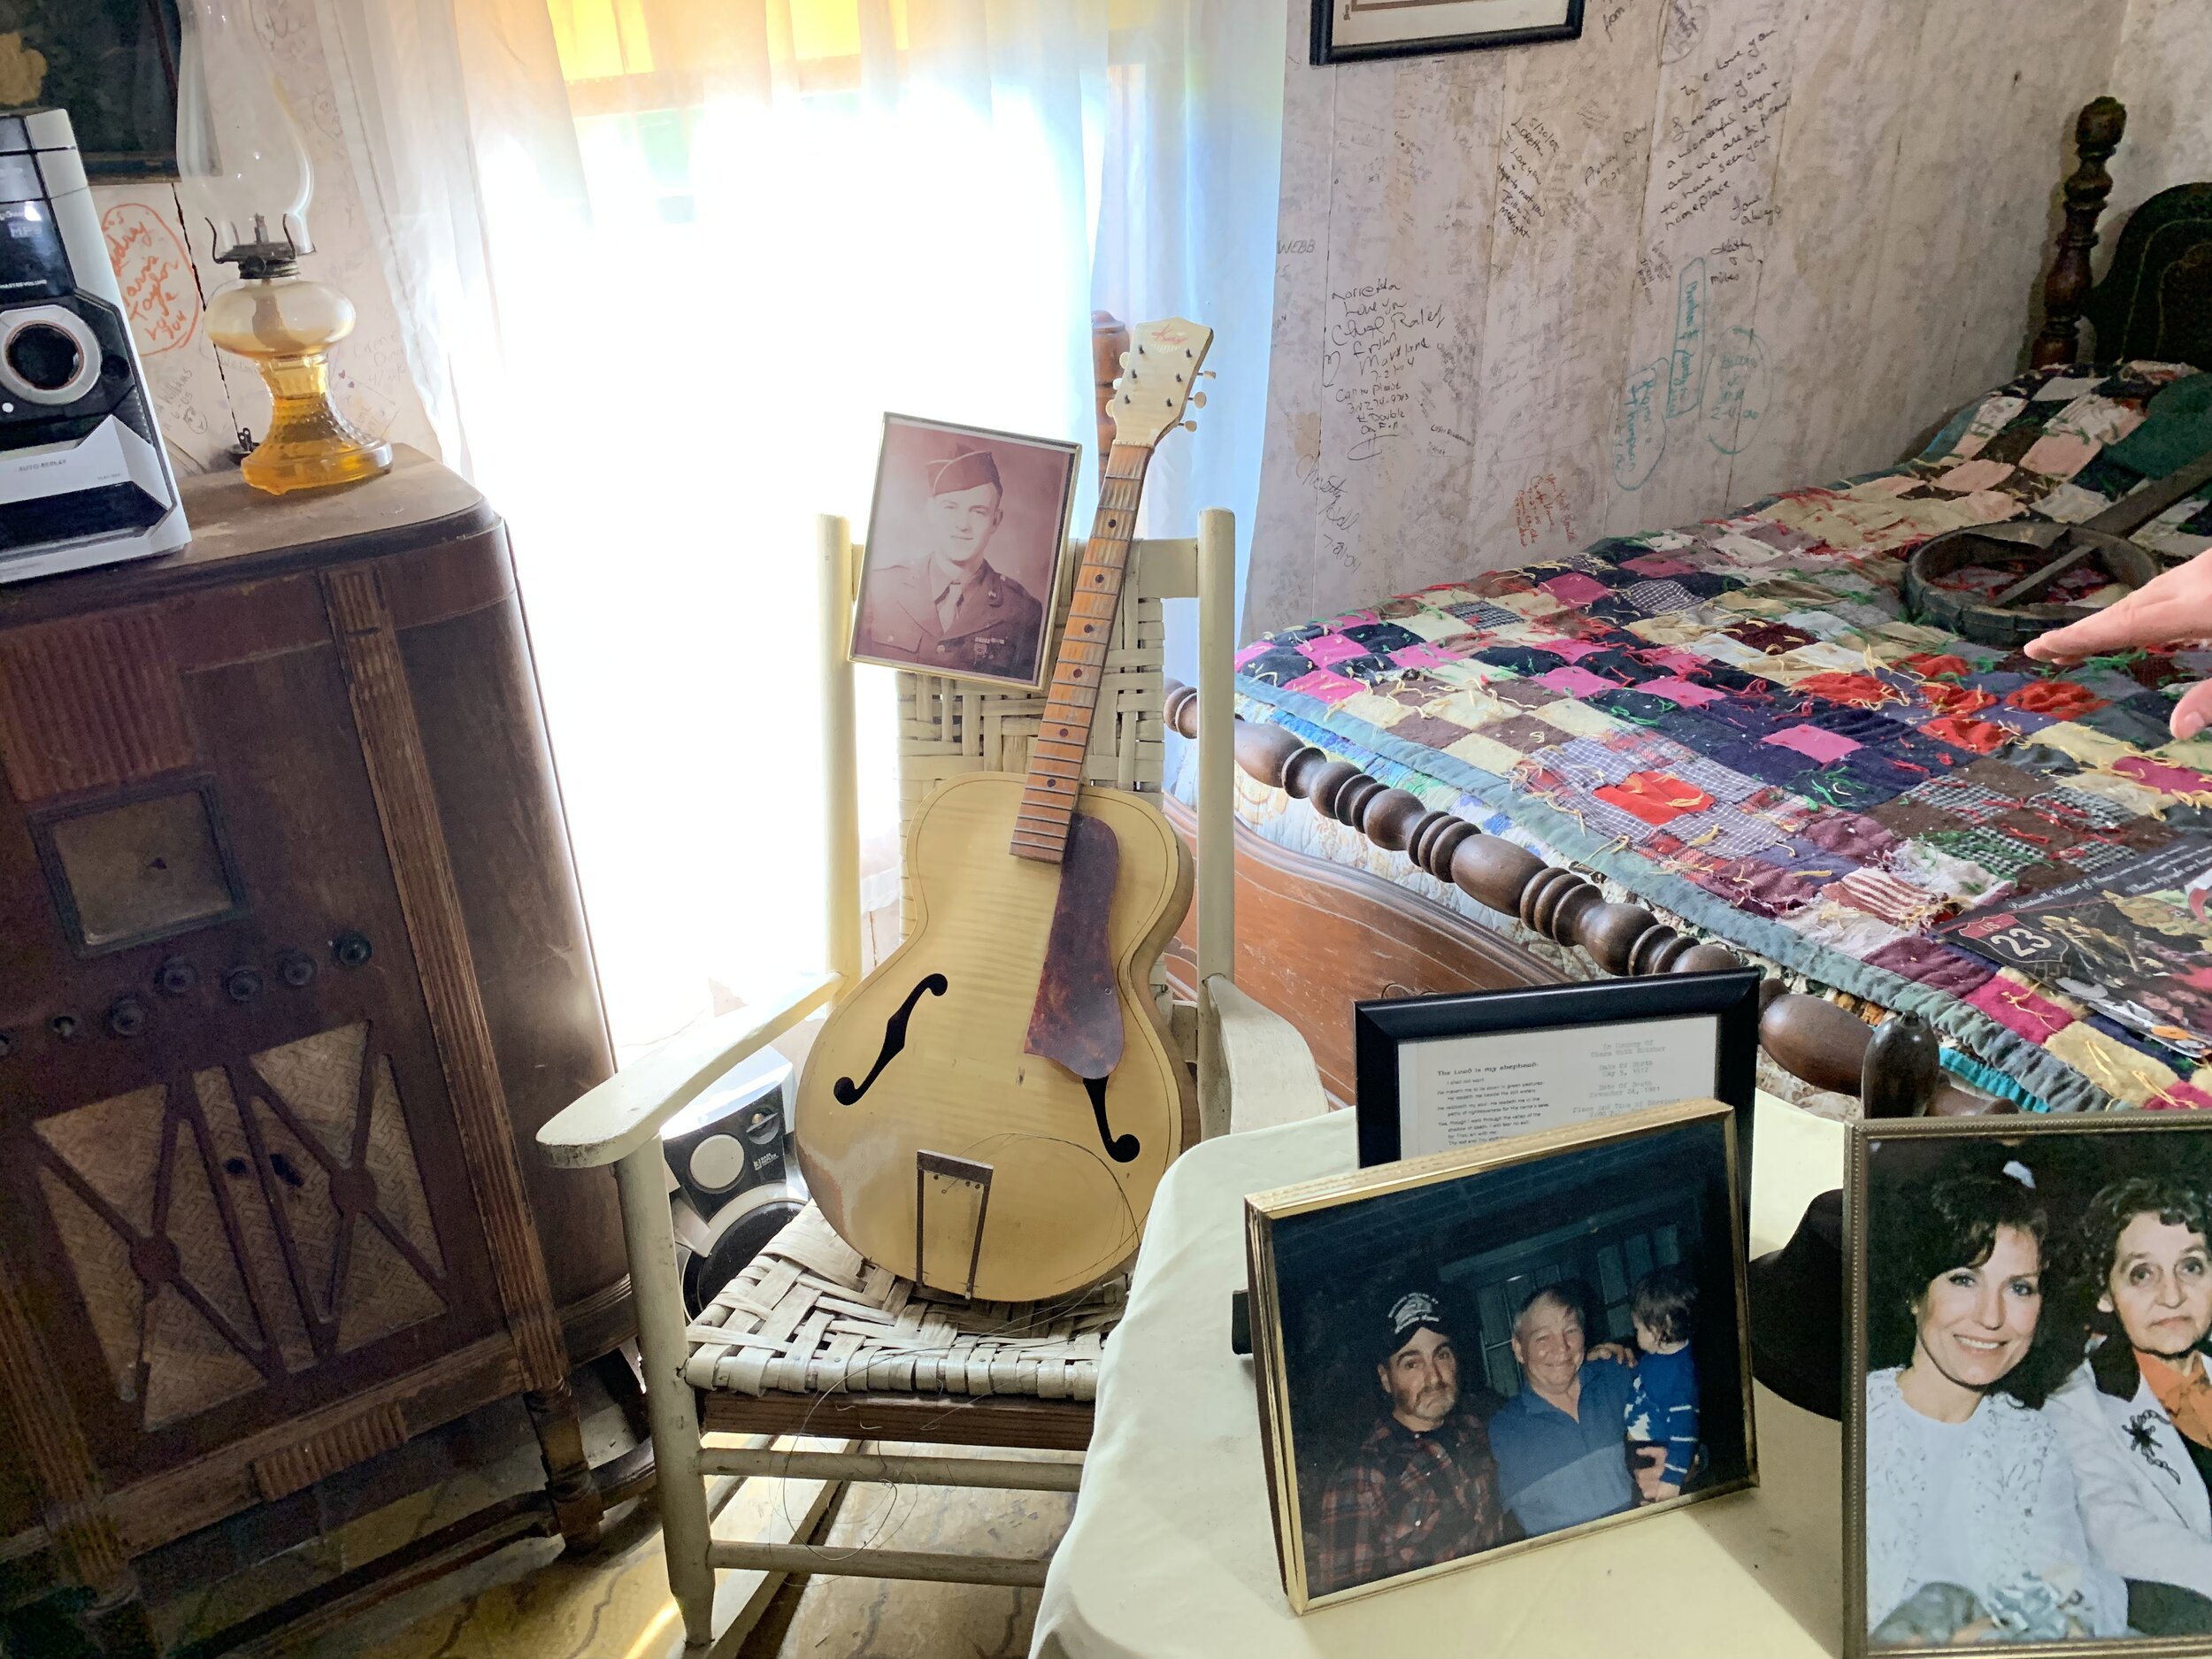 The Family Radio, and Loretta's First Guitar